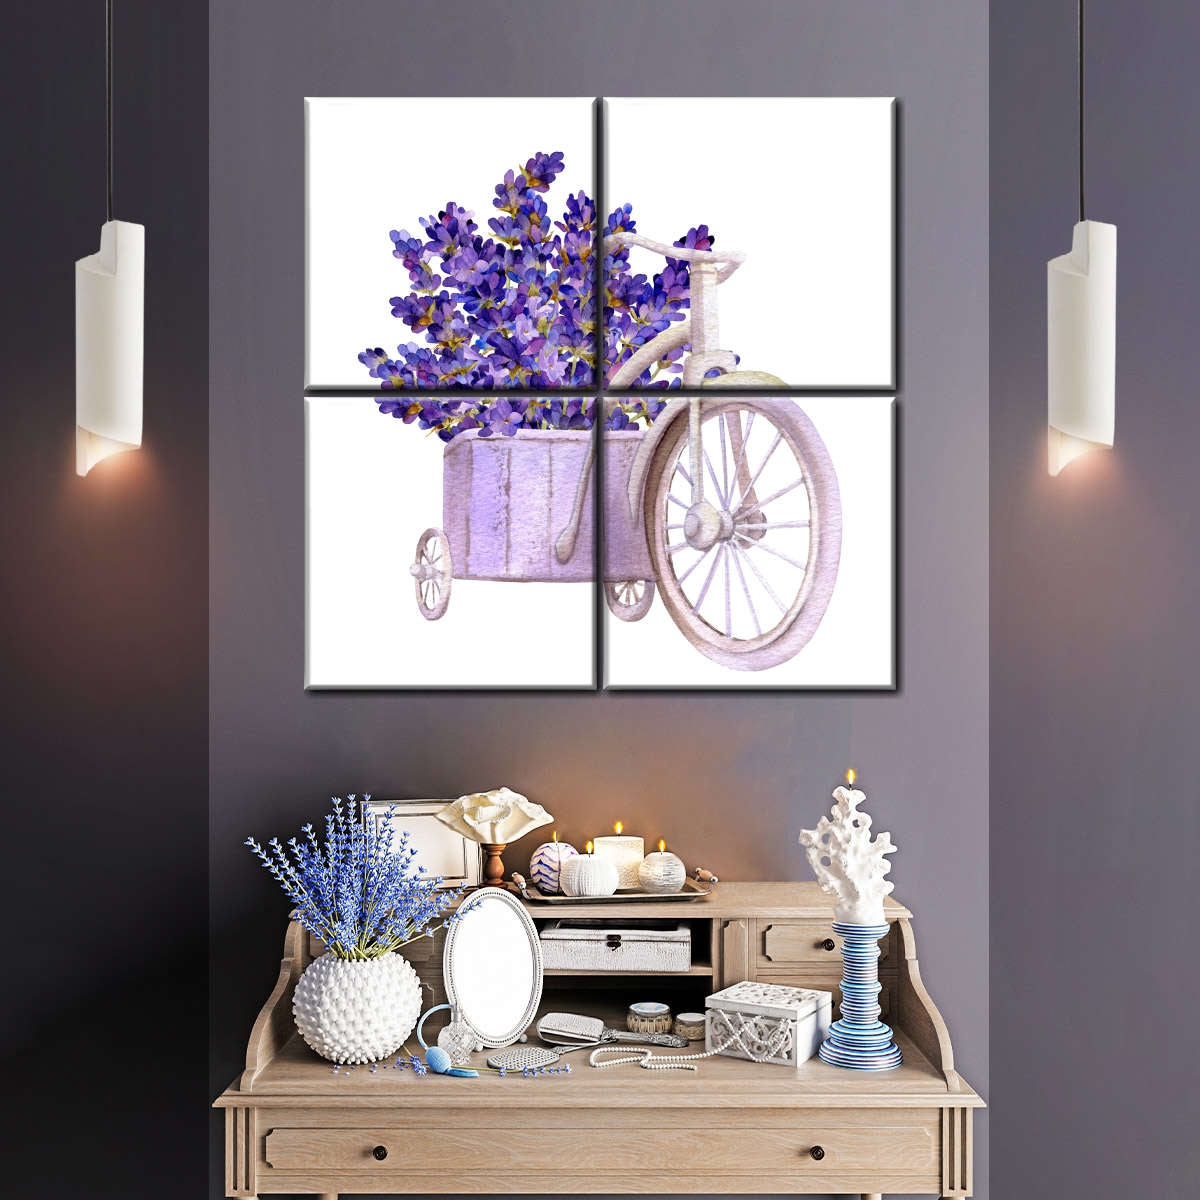 Ready to Refresh? These are the Colors That Go With Purple | 21Oak